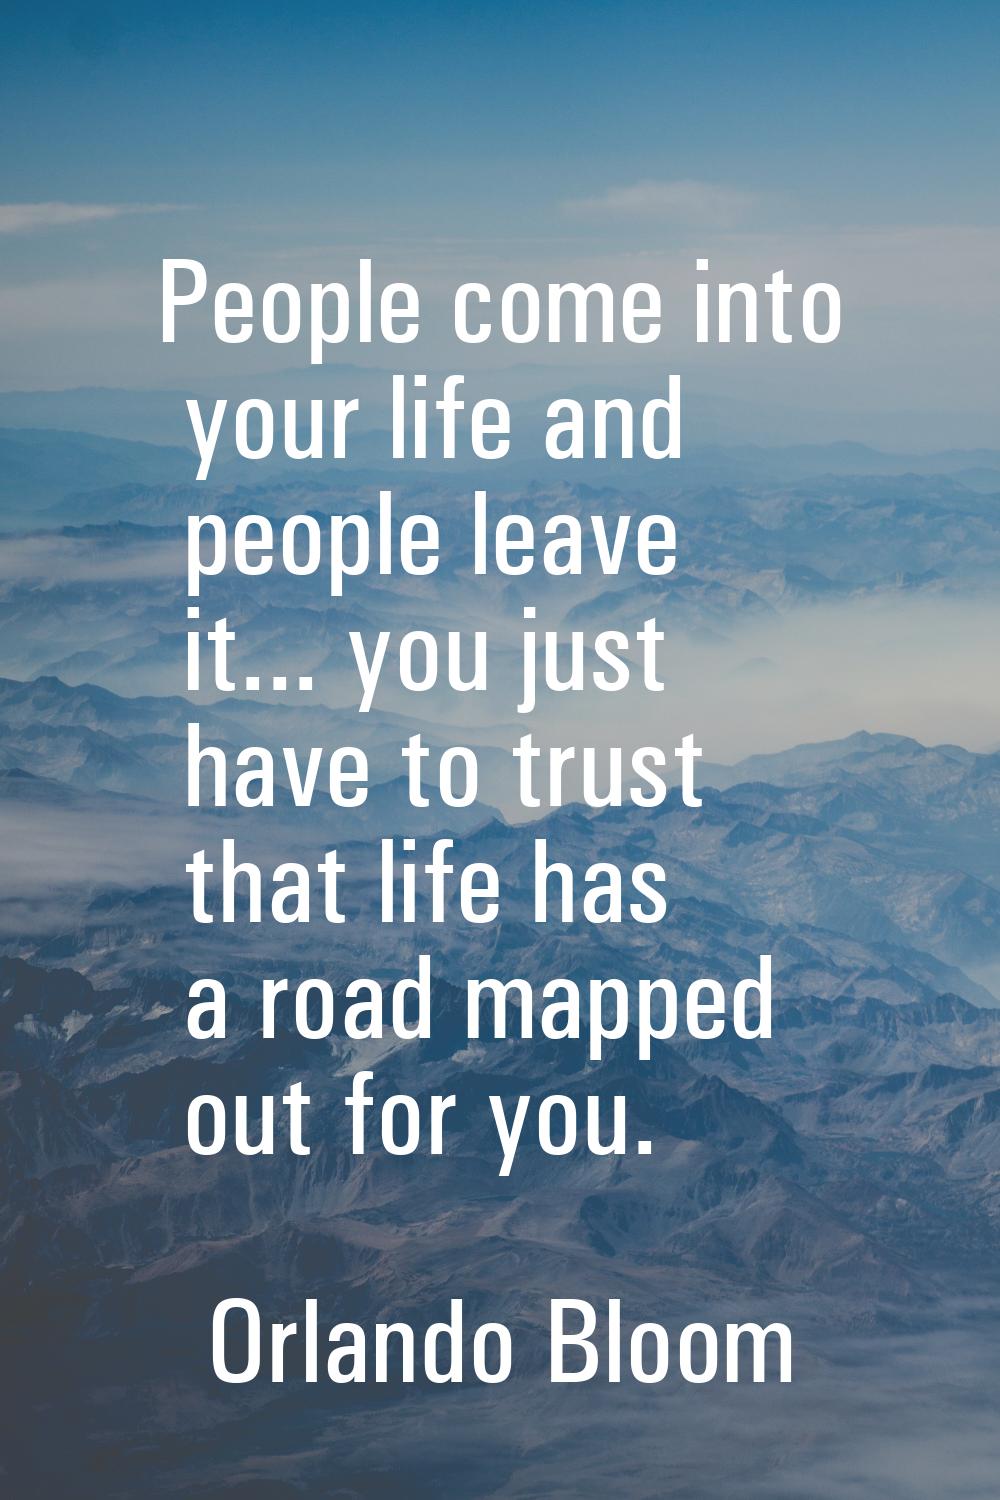 People come into your life and people leave it... you just have to trust that life has a road mappe